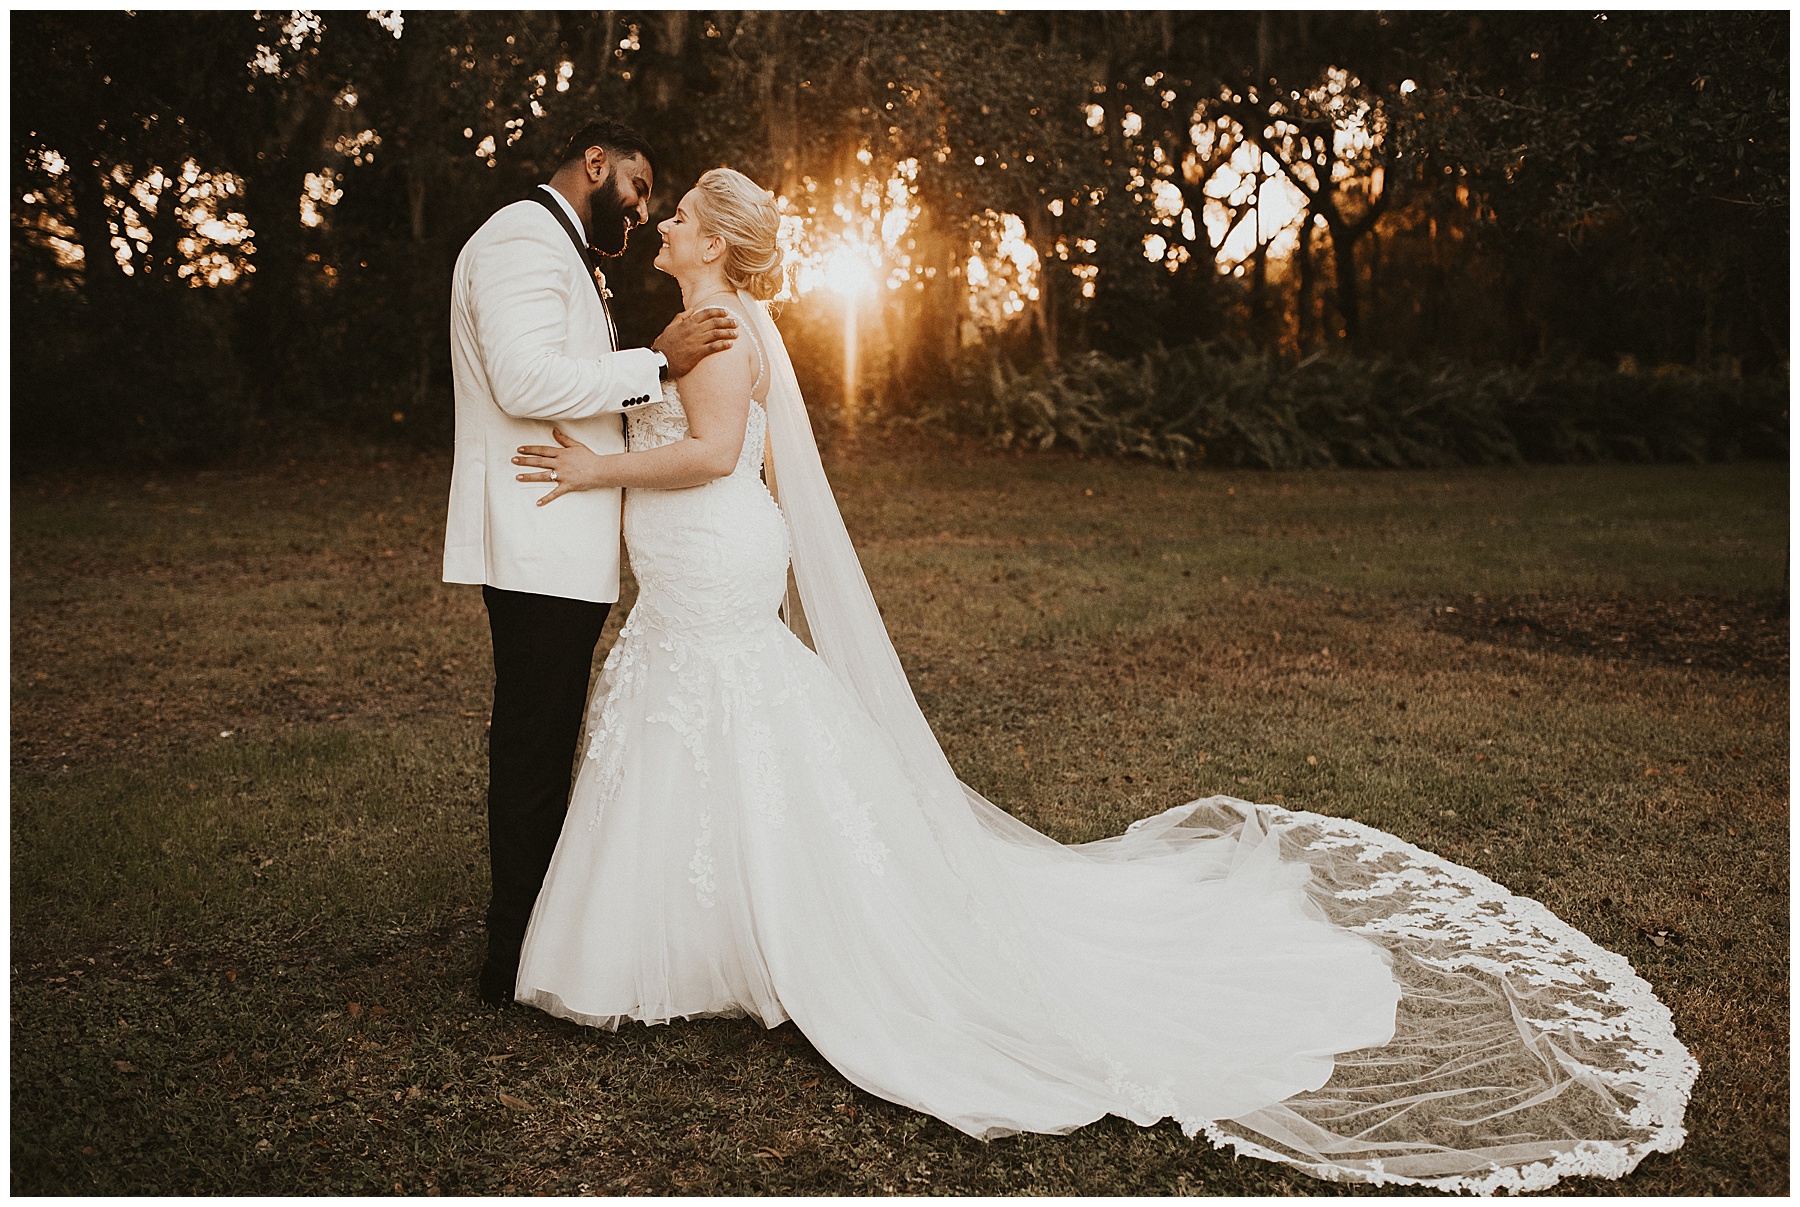 Bride and groom portraits at sunset, in Dover Florida - Photographed by Juju Photography - Destination wedding photographer